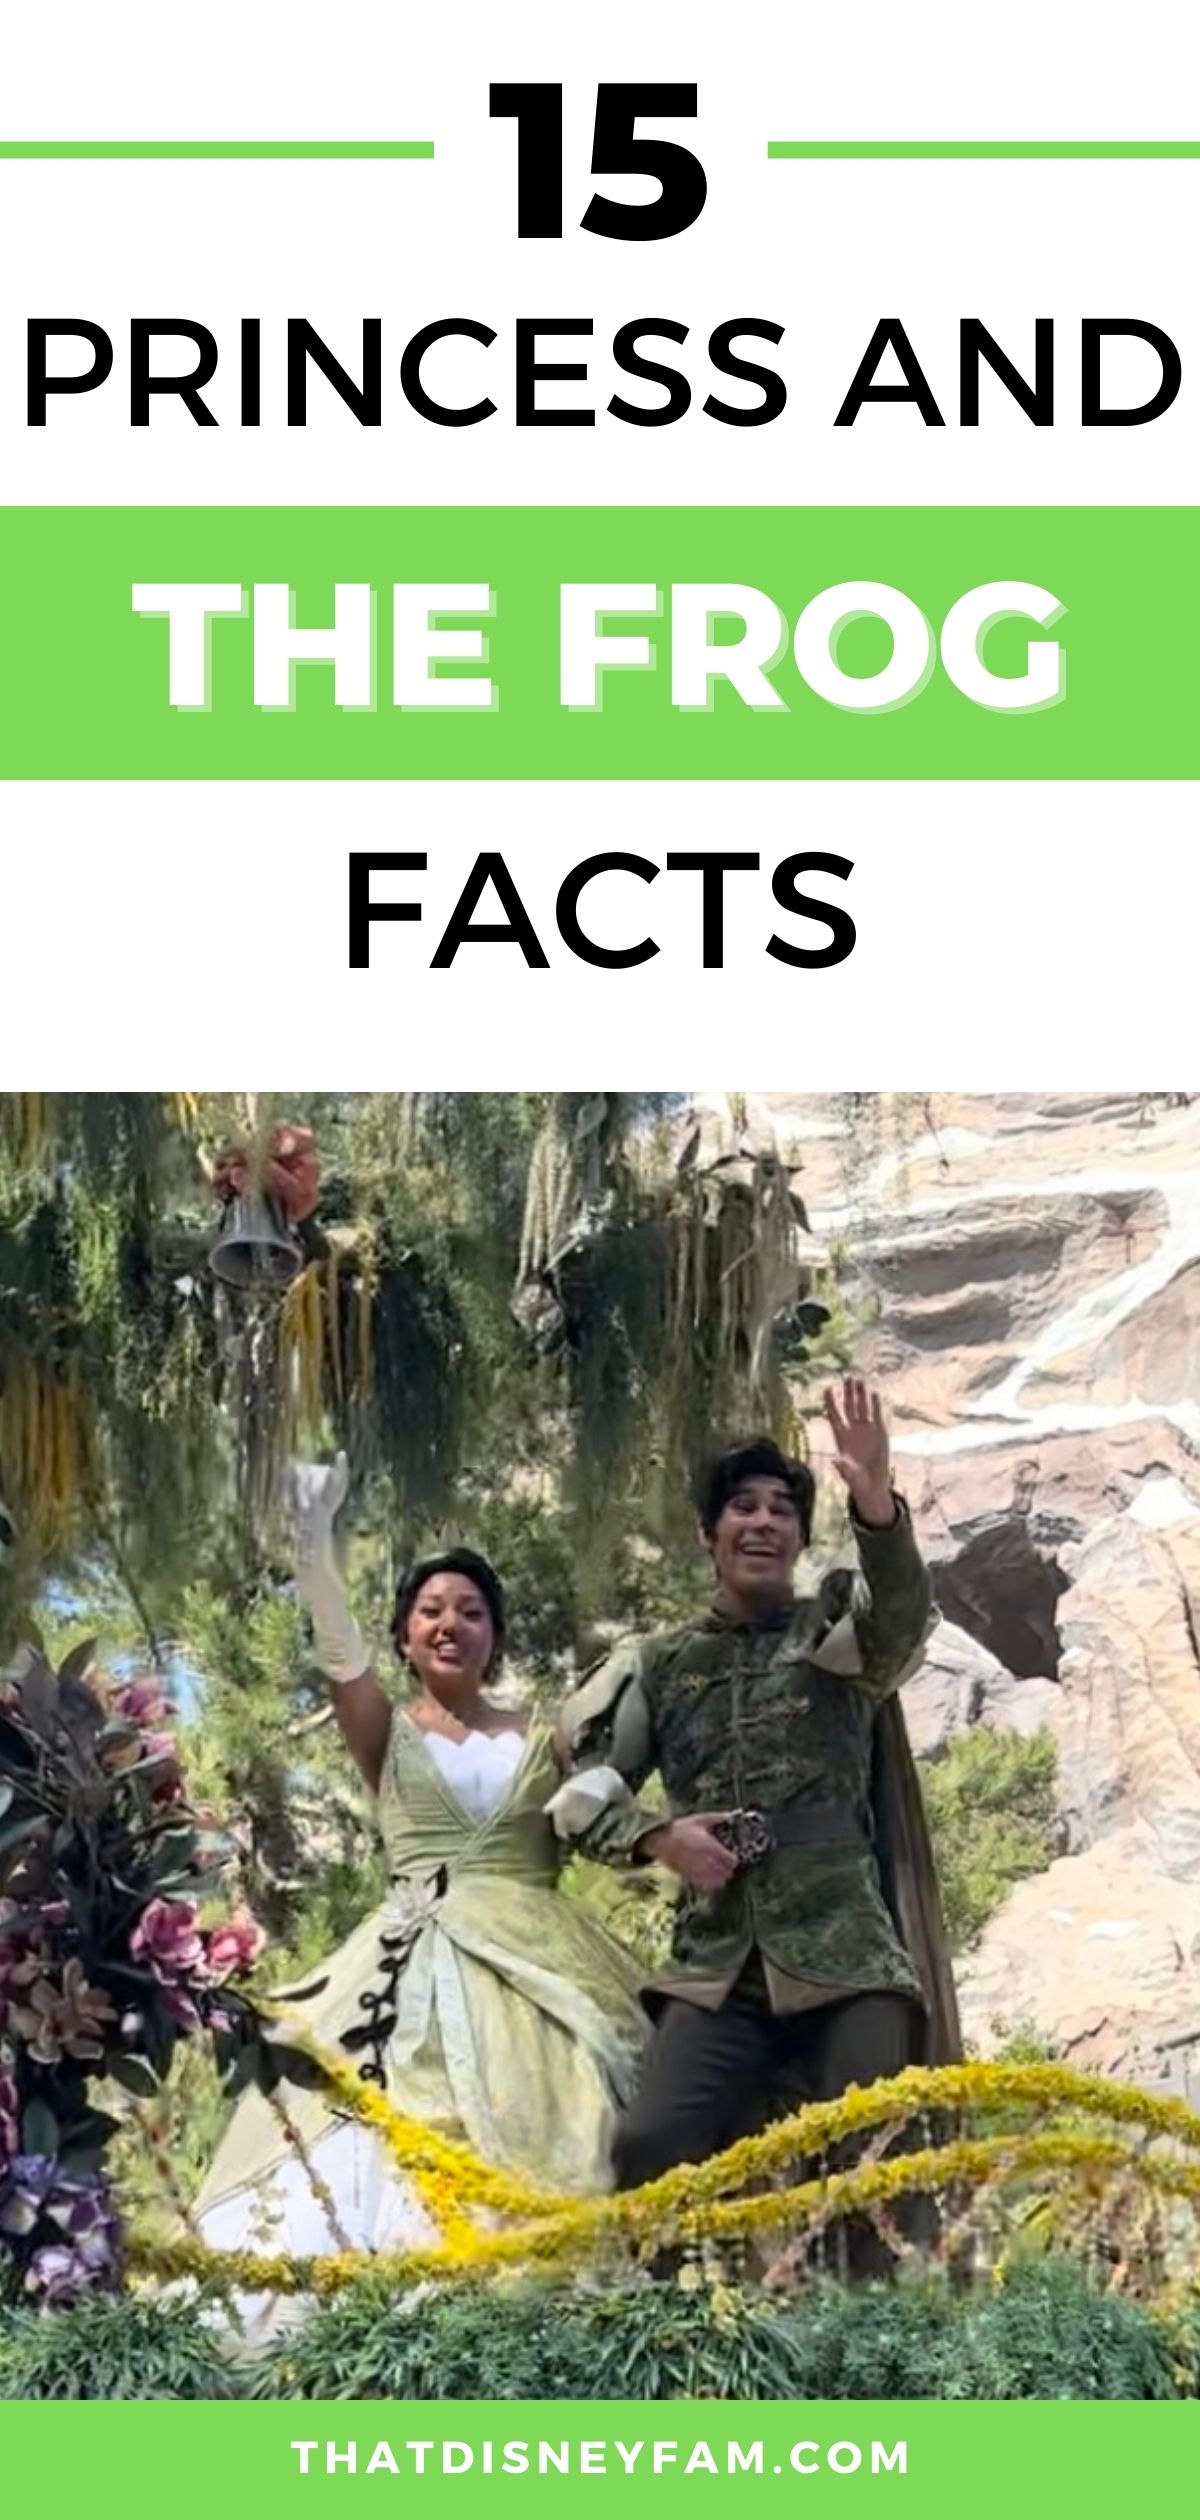 princess and the frog facts